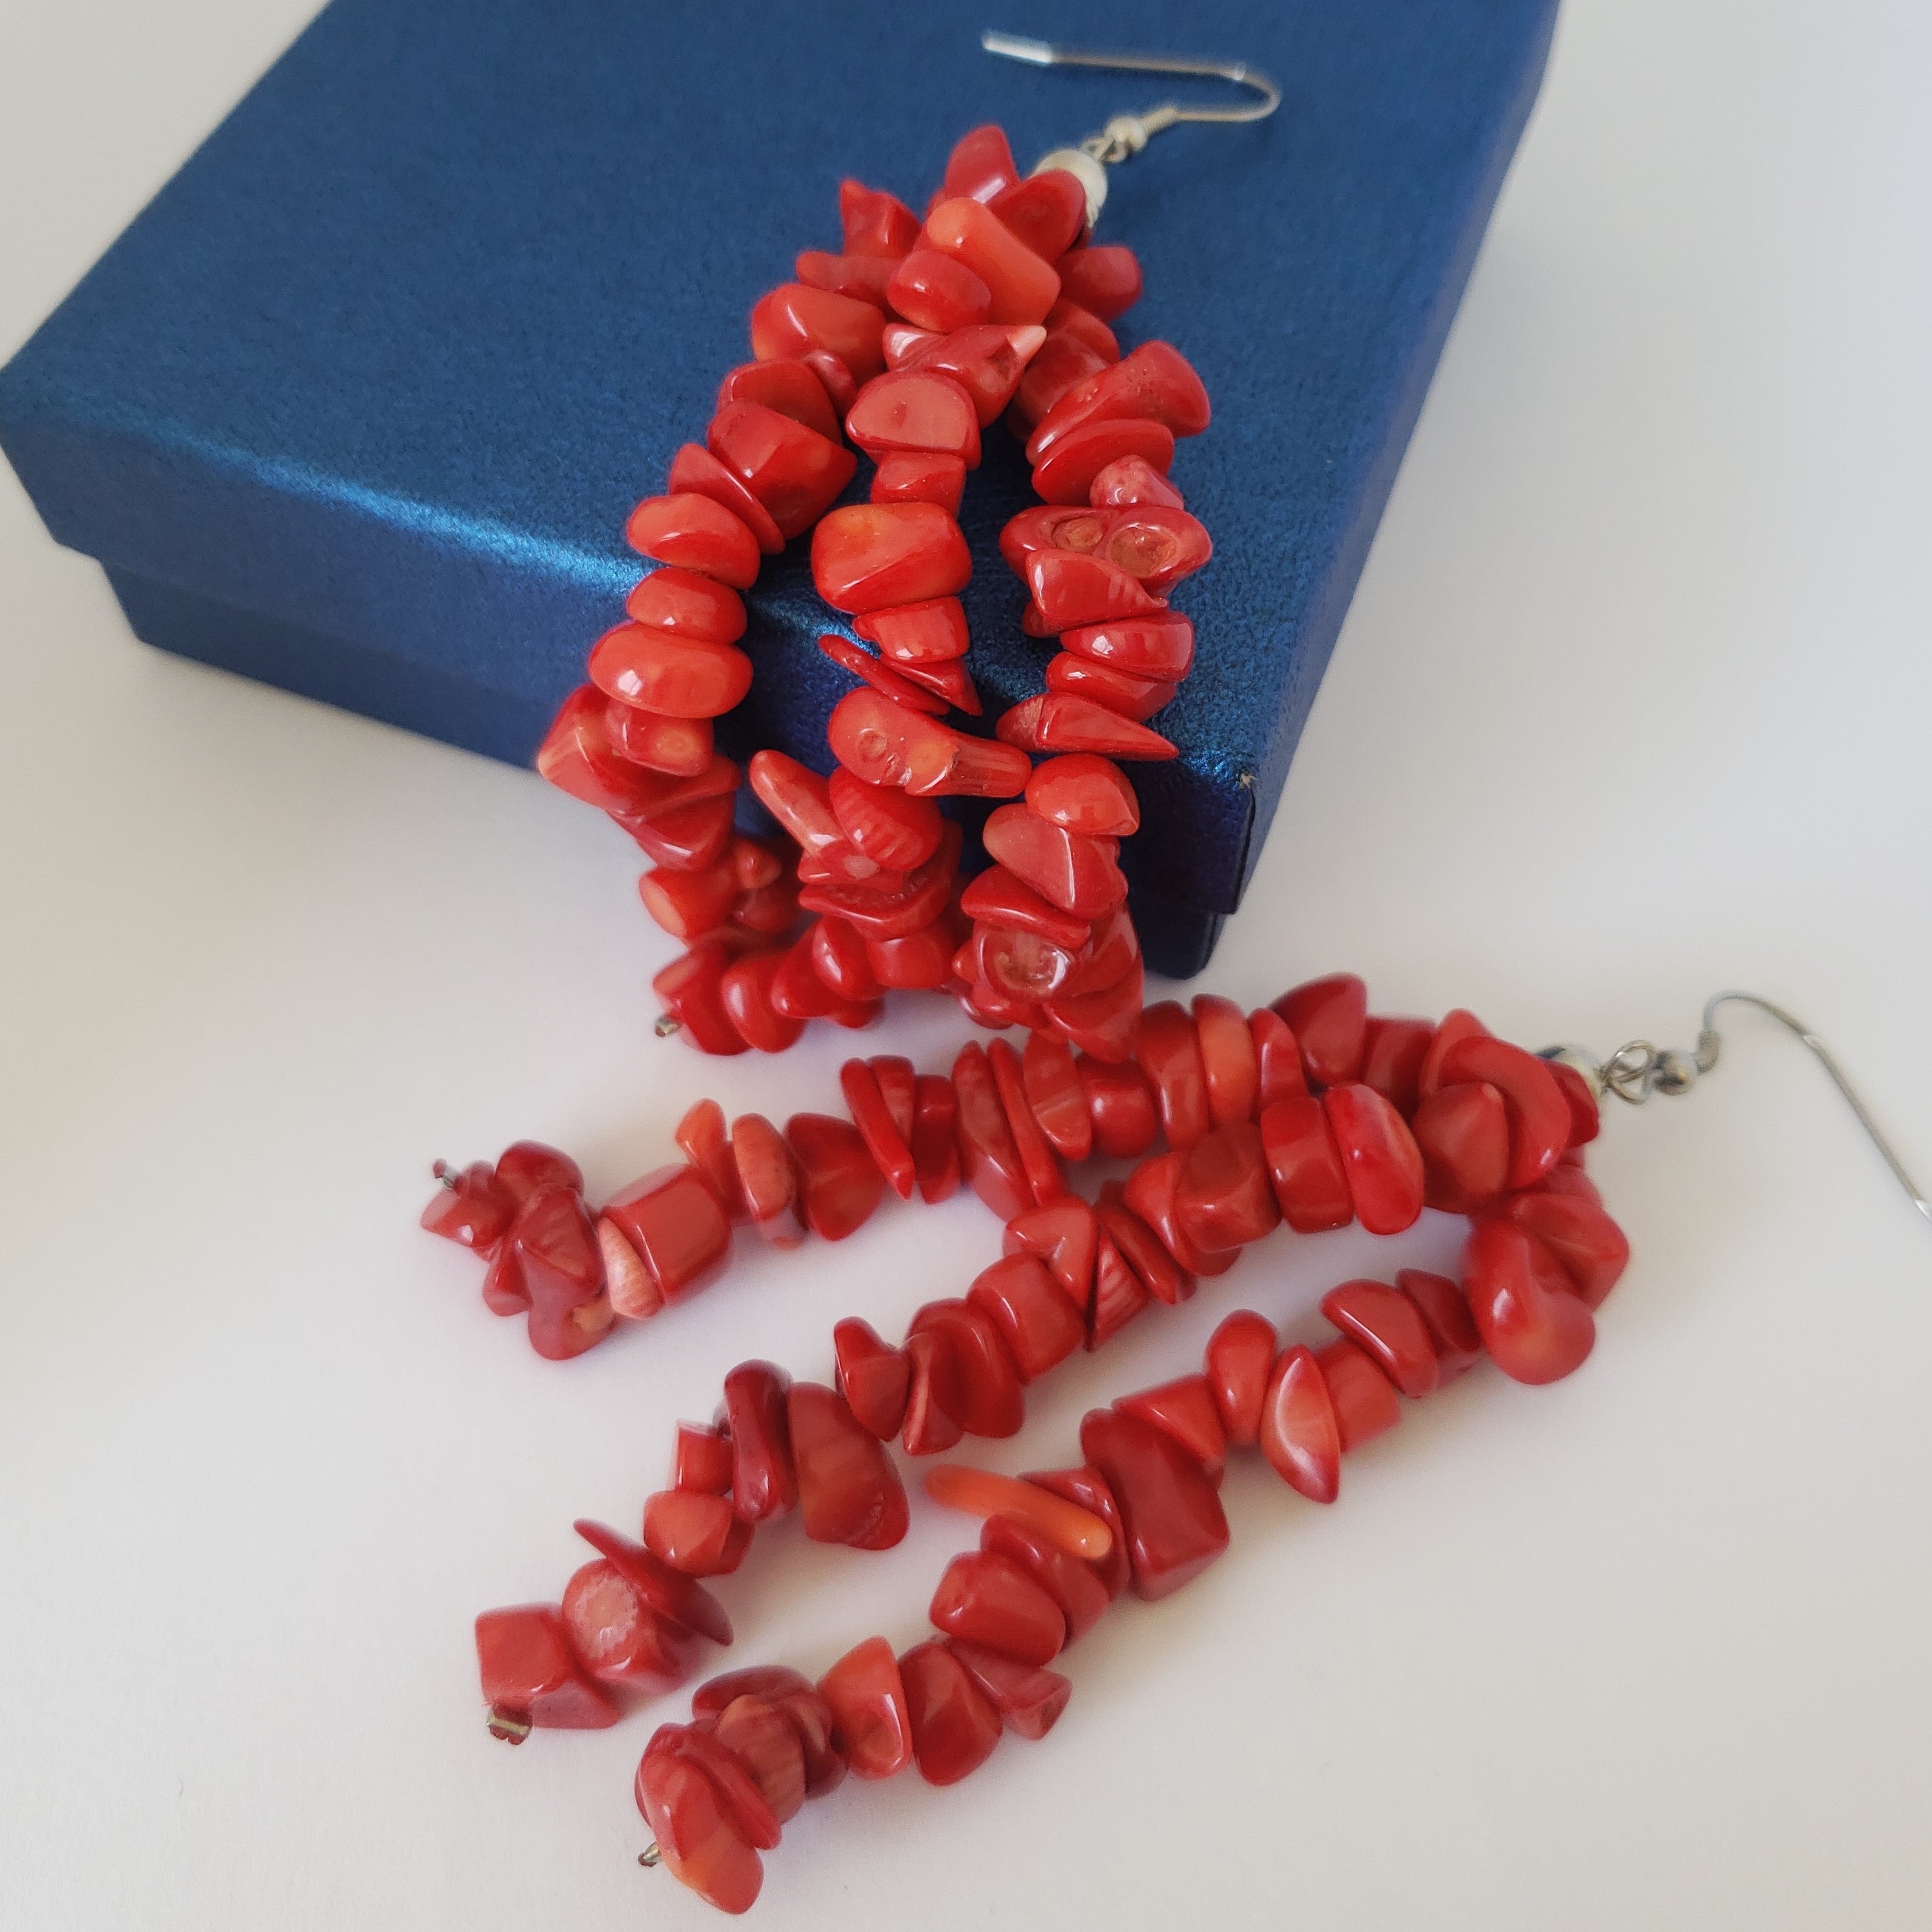 Polished Red Coral Chip Beads Triple Strand Earrings in Stainless Steel - Houzz of DVA Boutique